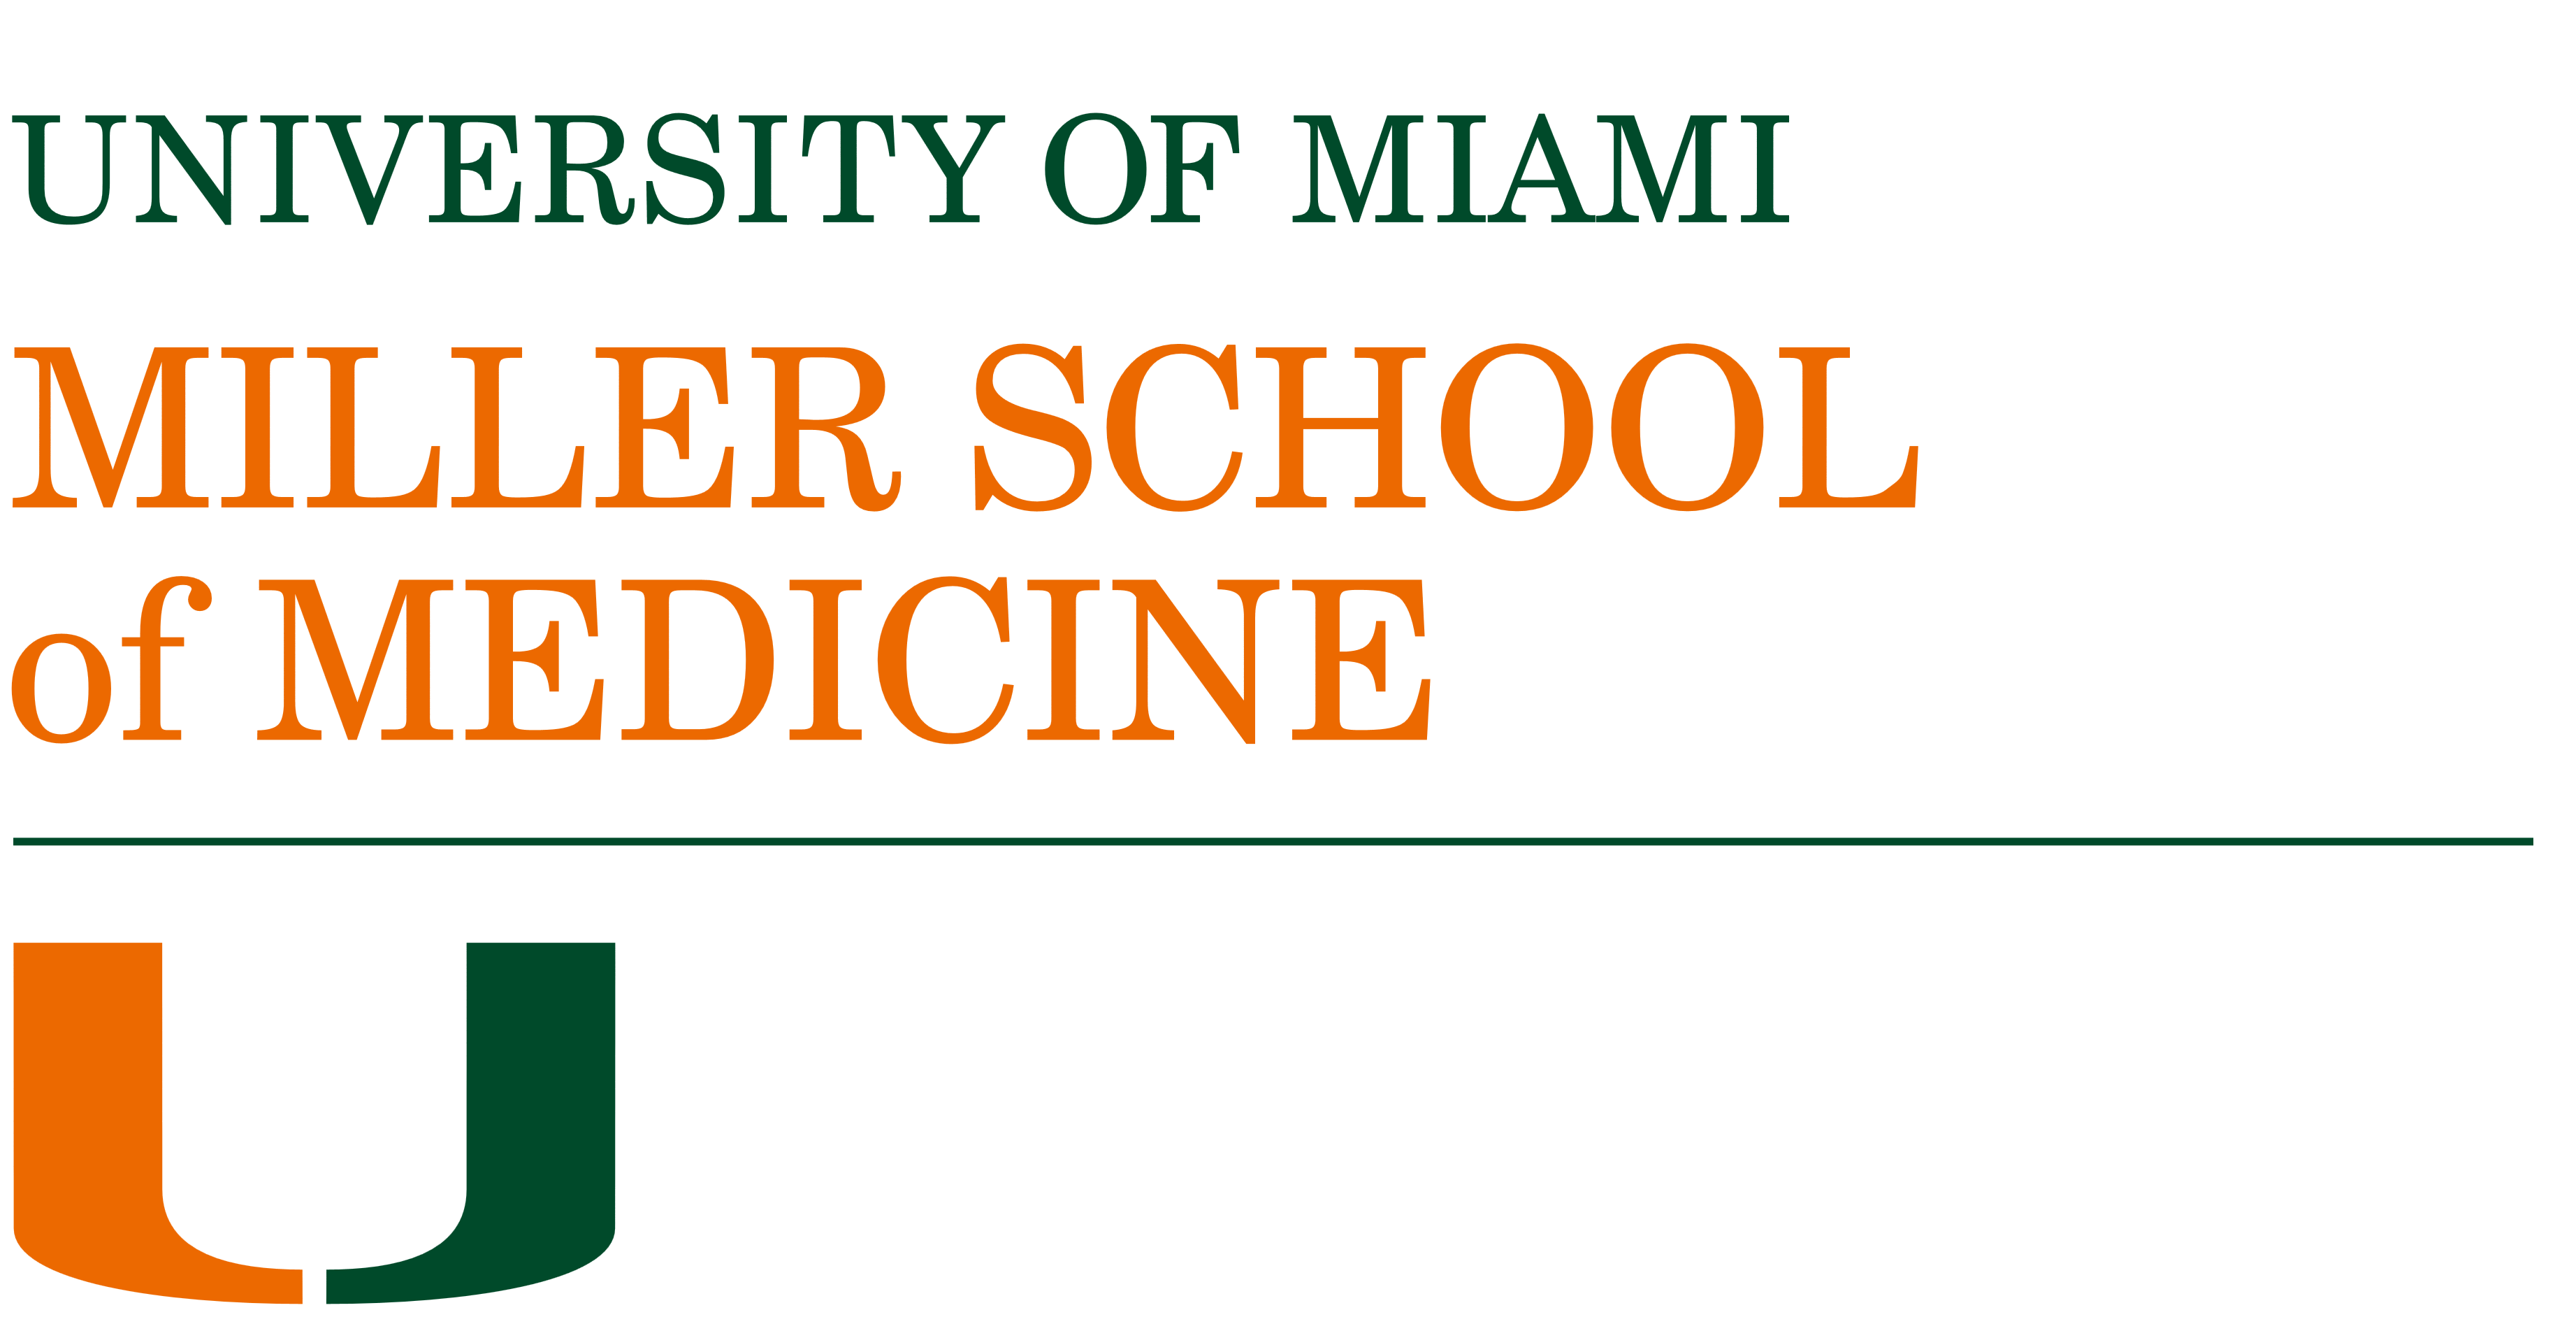 University of Miami is where Dr. Friedlander got his medical degree to become a plastic surgeon in Atlanta.